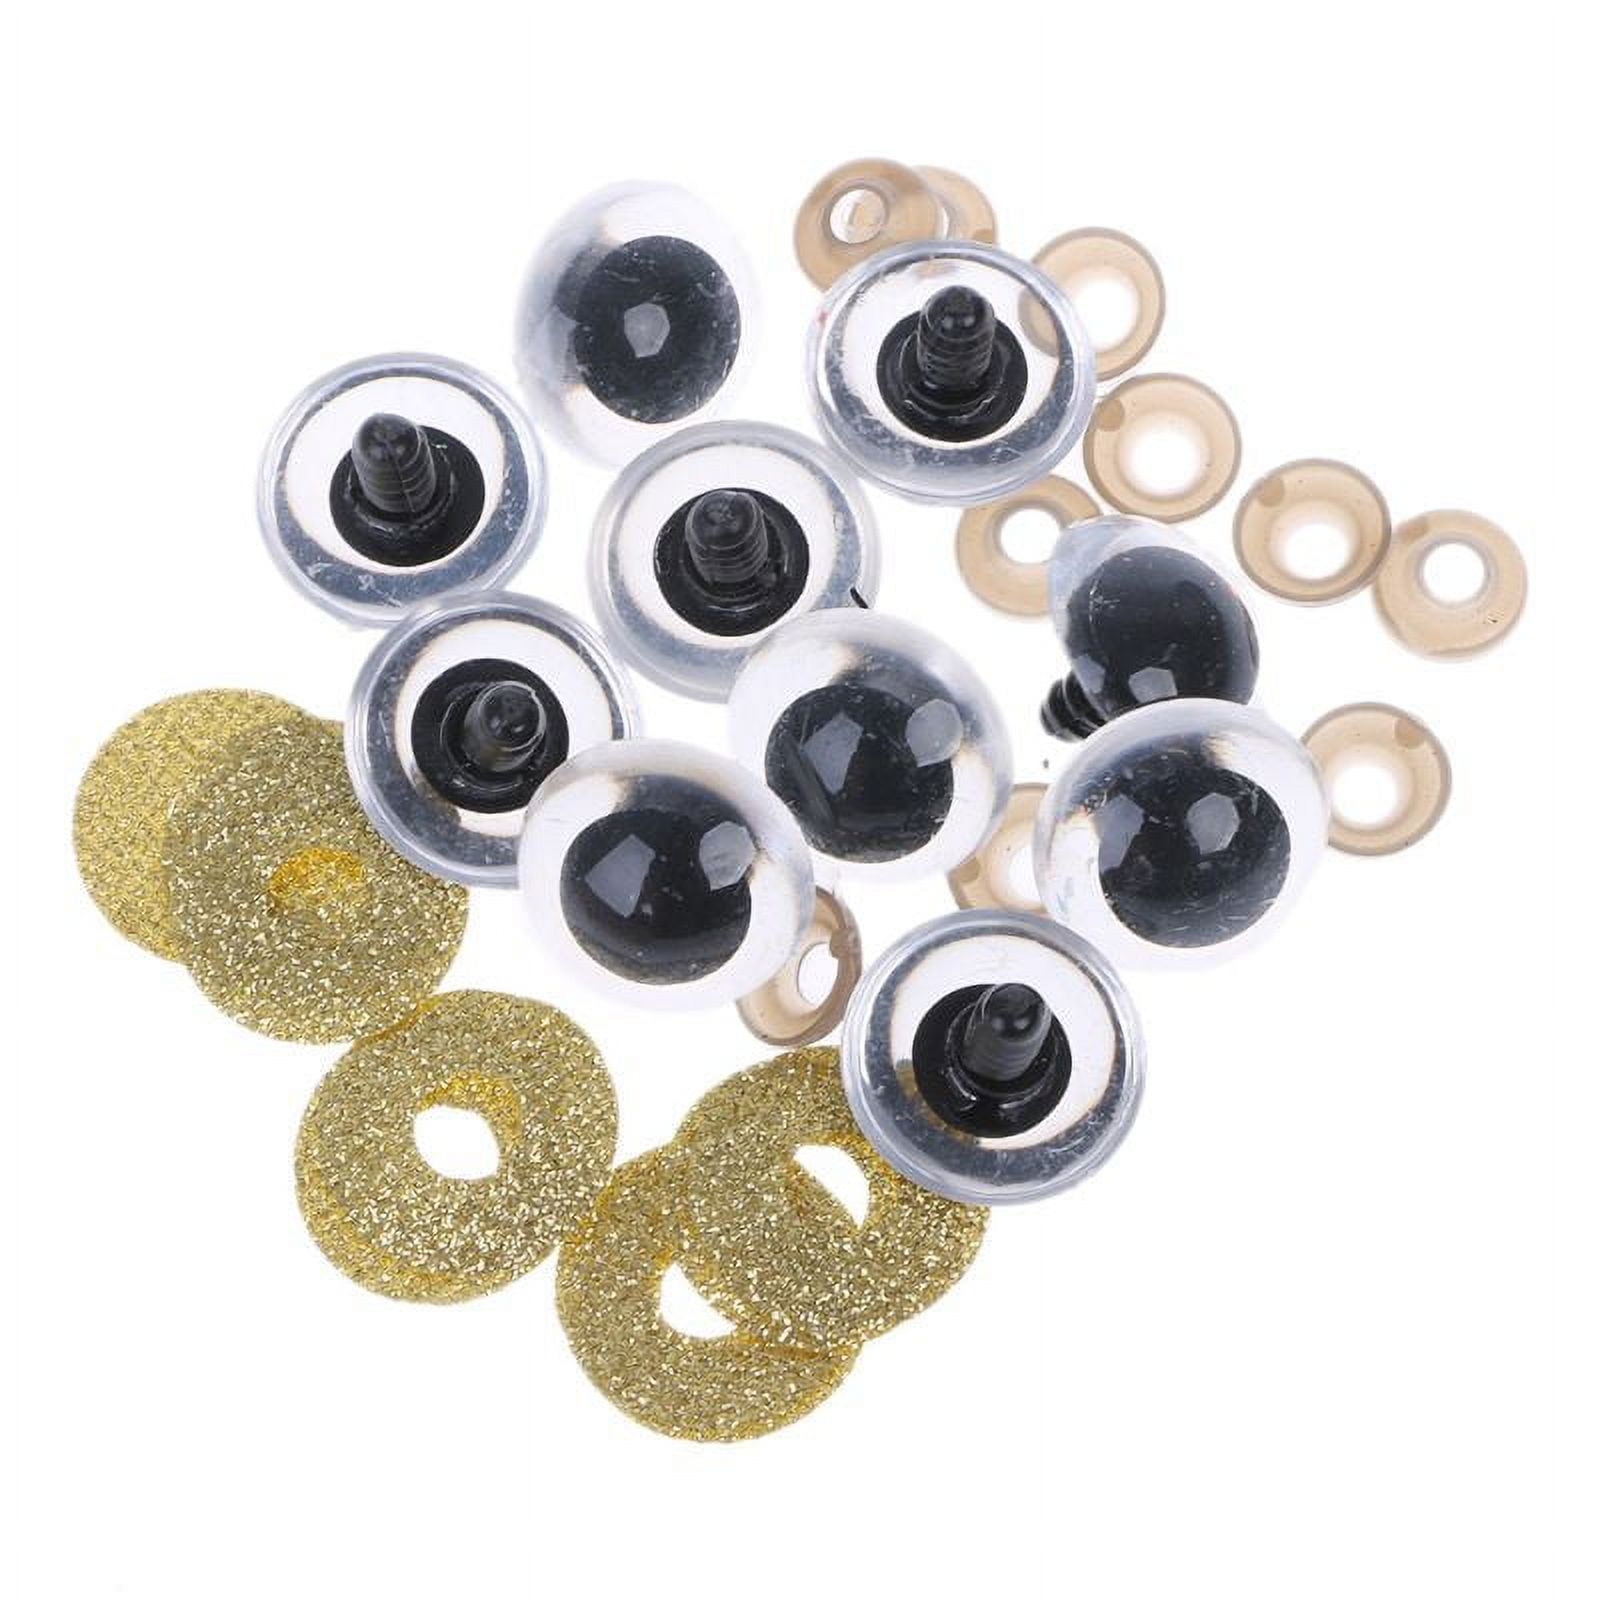 KOOSUFA 12 Pcs 6 Color Glitter Safety Eyes 9mm 12mm 14mm 16mm 18mm 20mm 25mm Premium Round Amigurumi Eyes with Washers for Doll Teddy Bear Puppet